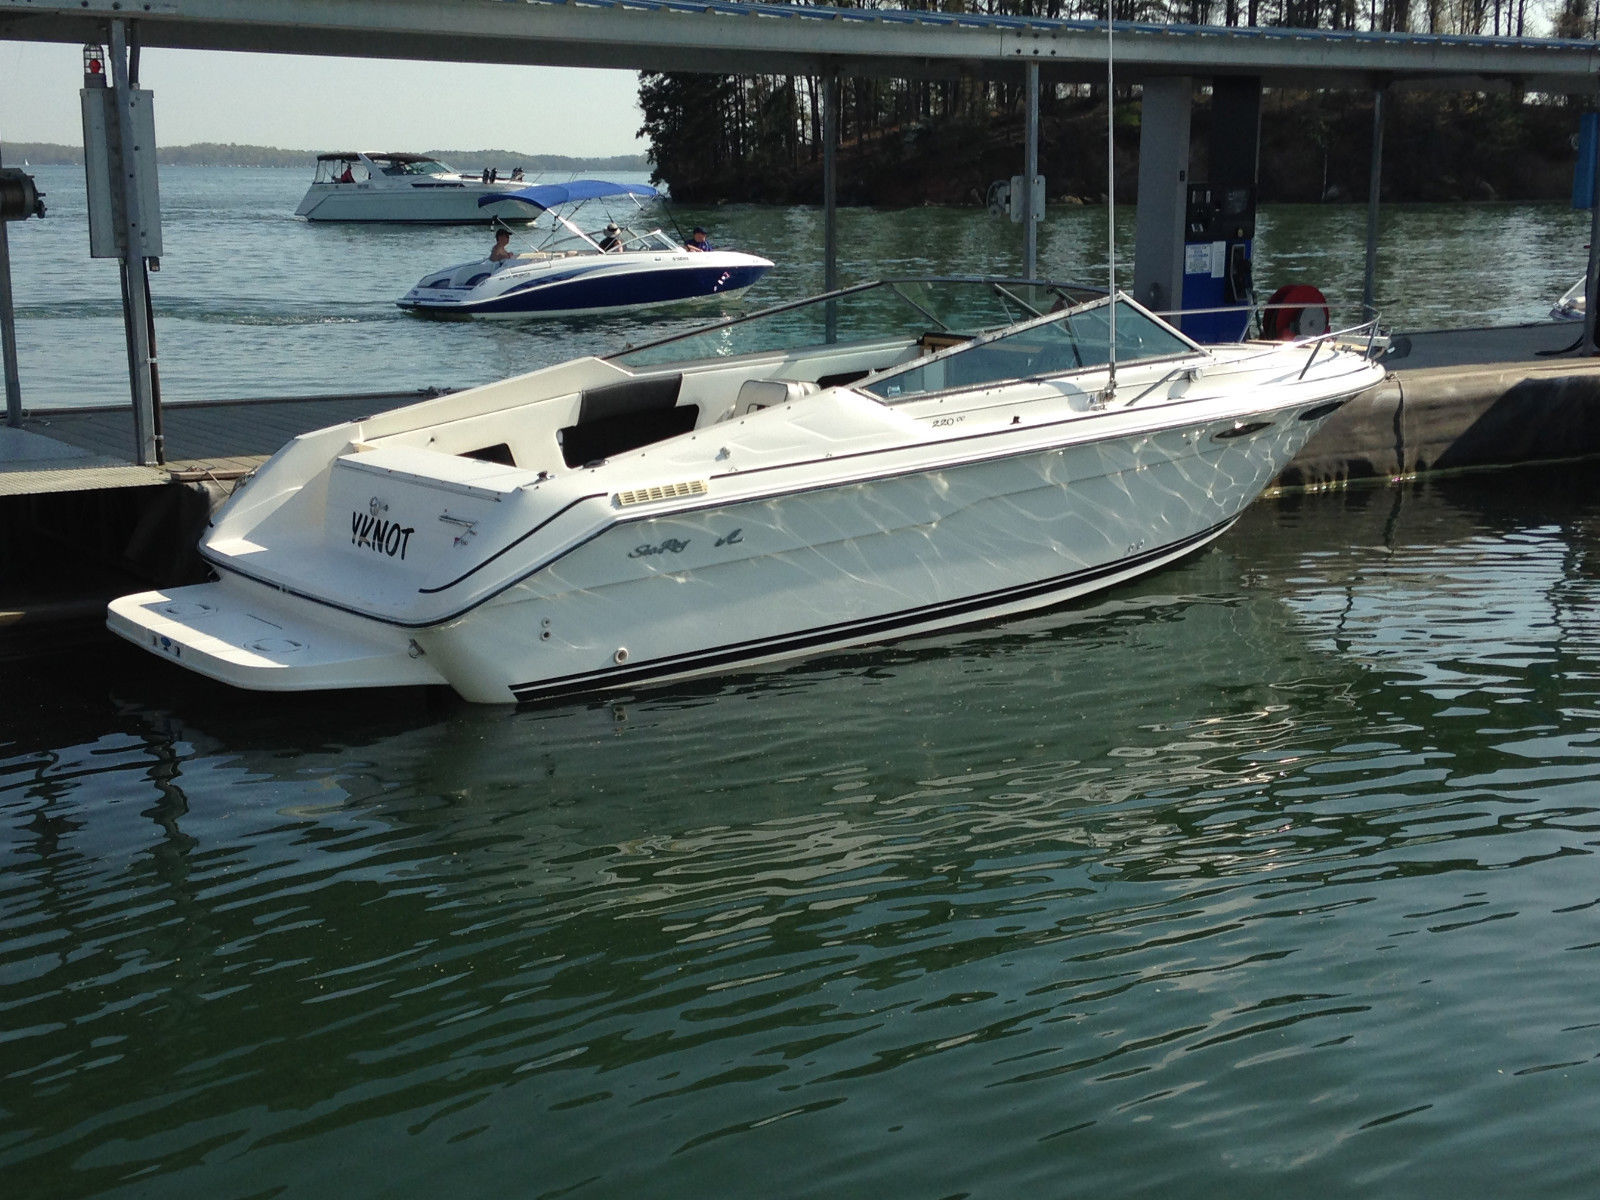 Sea Ray 220 CC 1990 for sale for $12,000 - Boats-from-USA.com